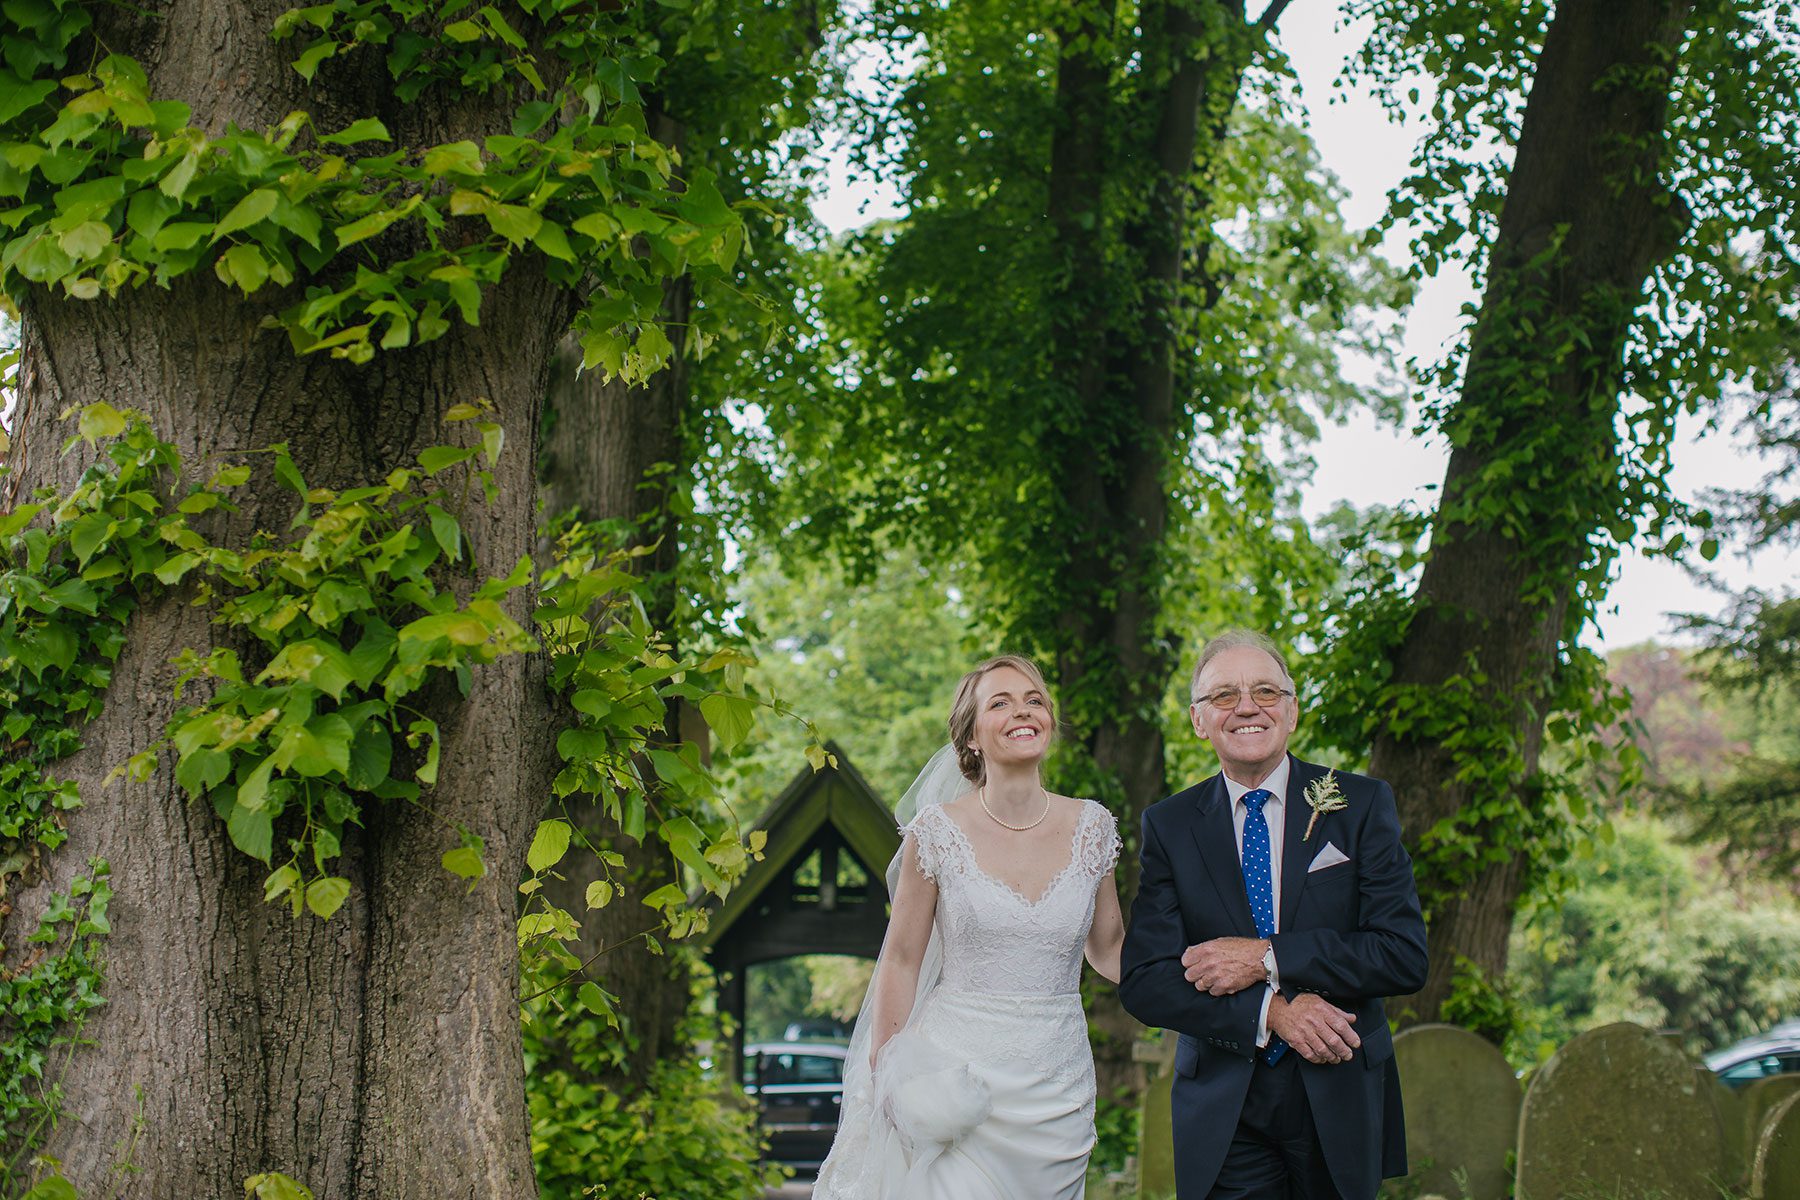 The Church - Reportage Wedding Photography in Cheltenham, Gloucestershire & the Cotswolds | Bullit Photography.